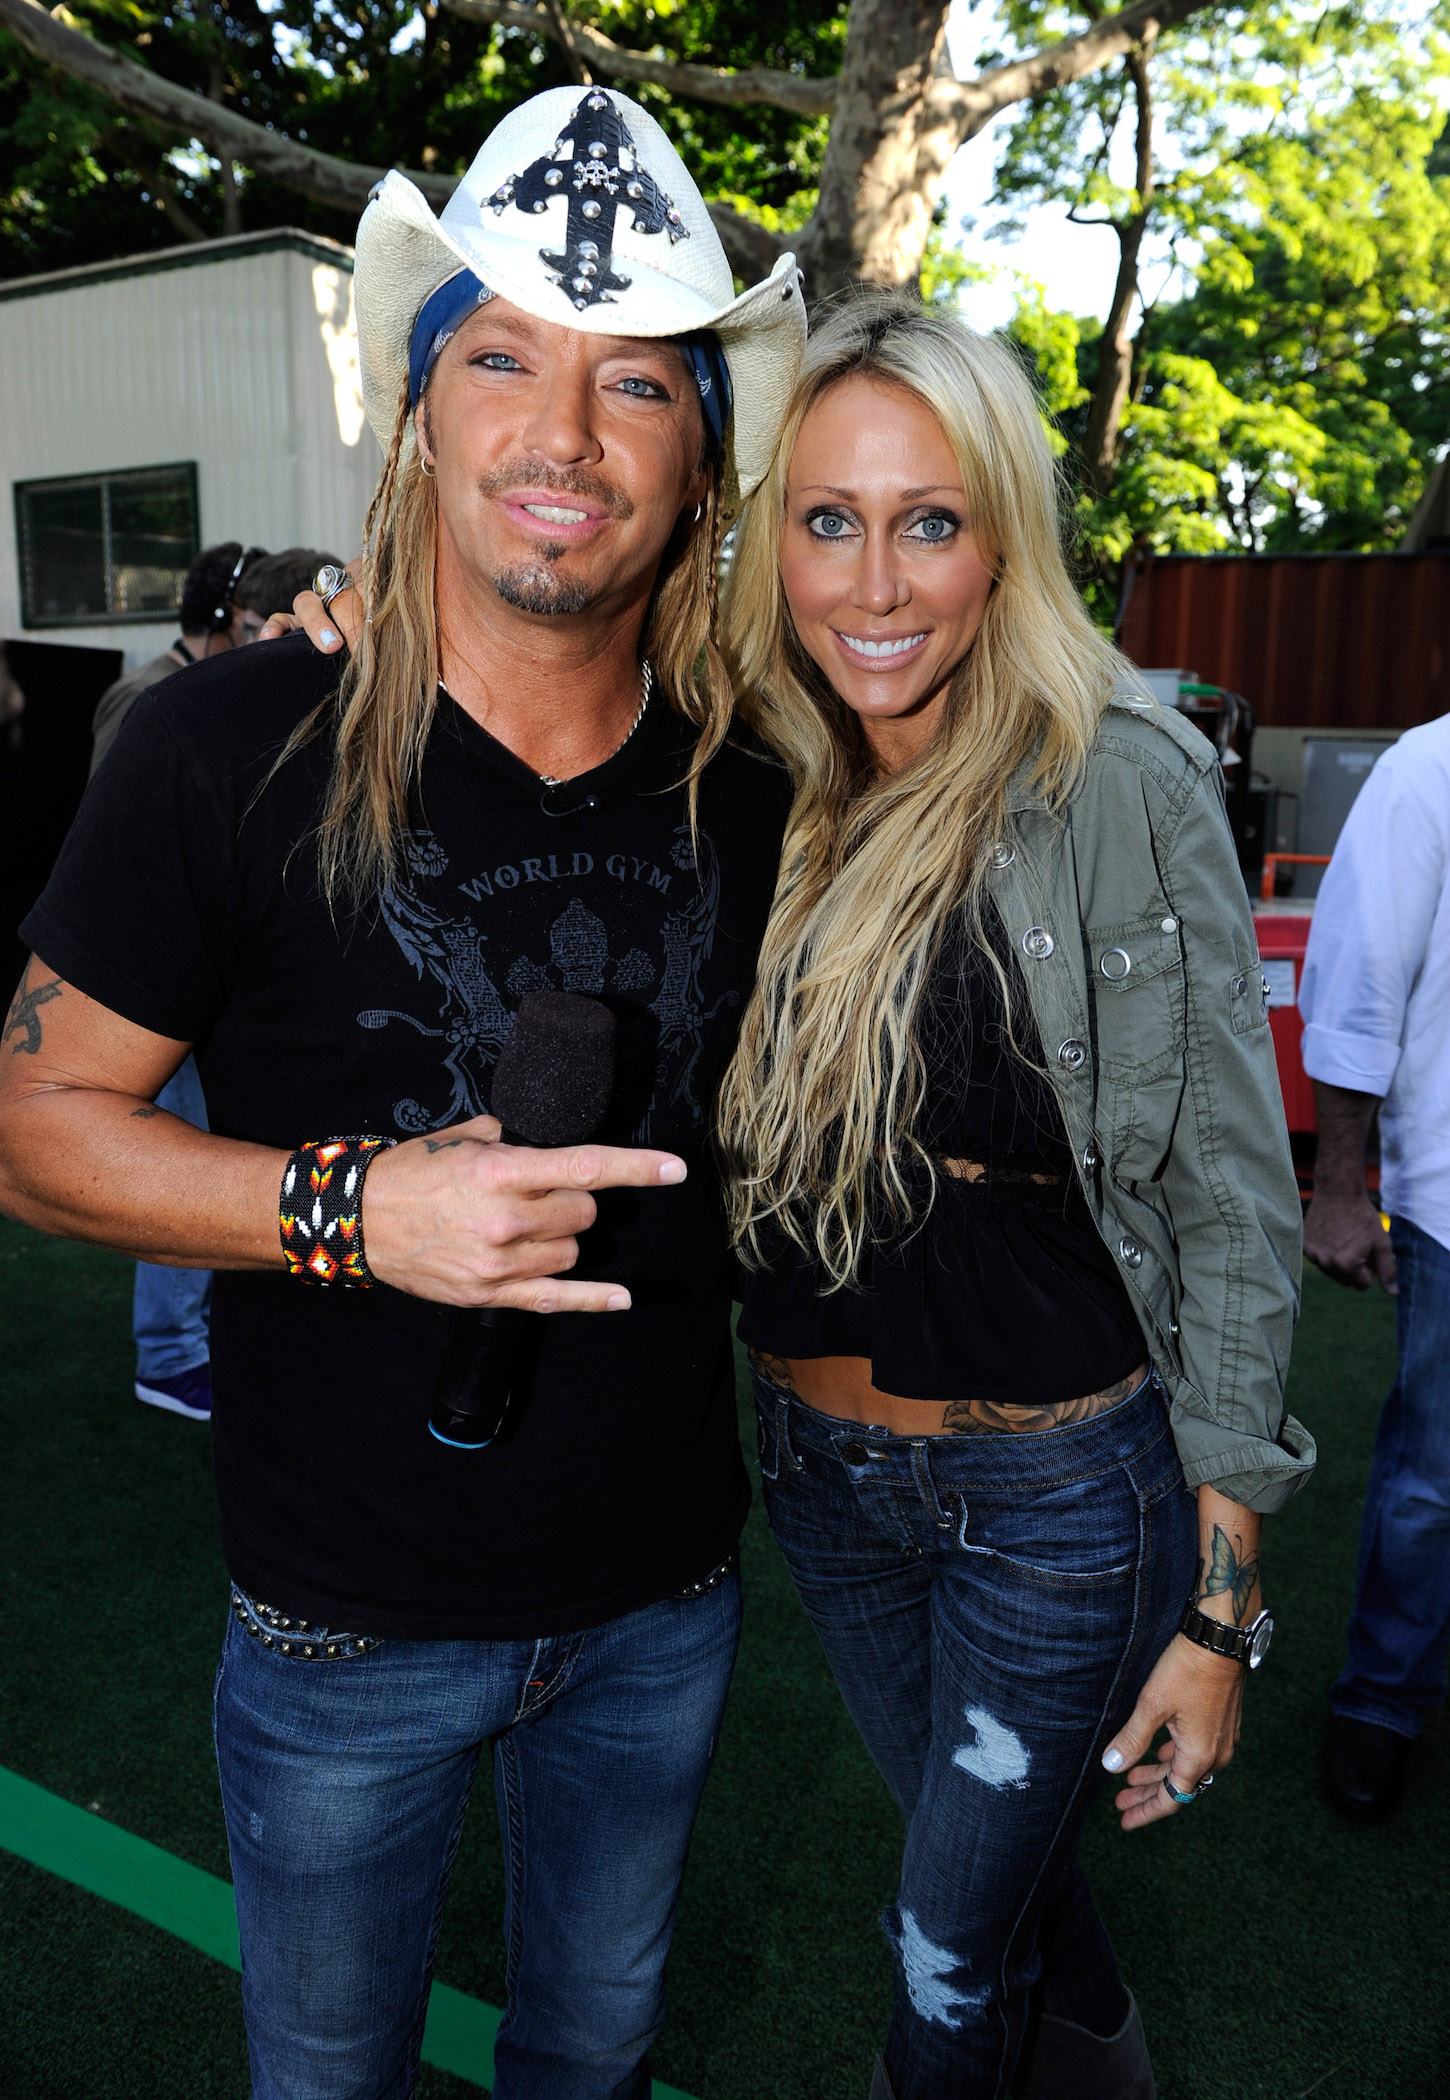 Bret Michaels and Tish Cyrus standing with their arms around each other and smiling for a photo